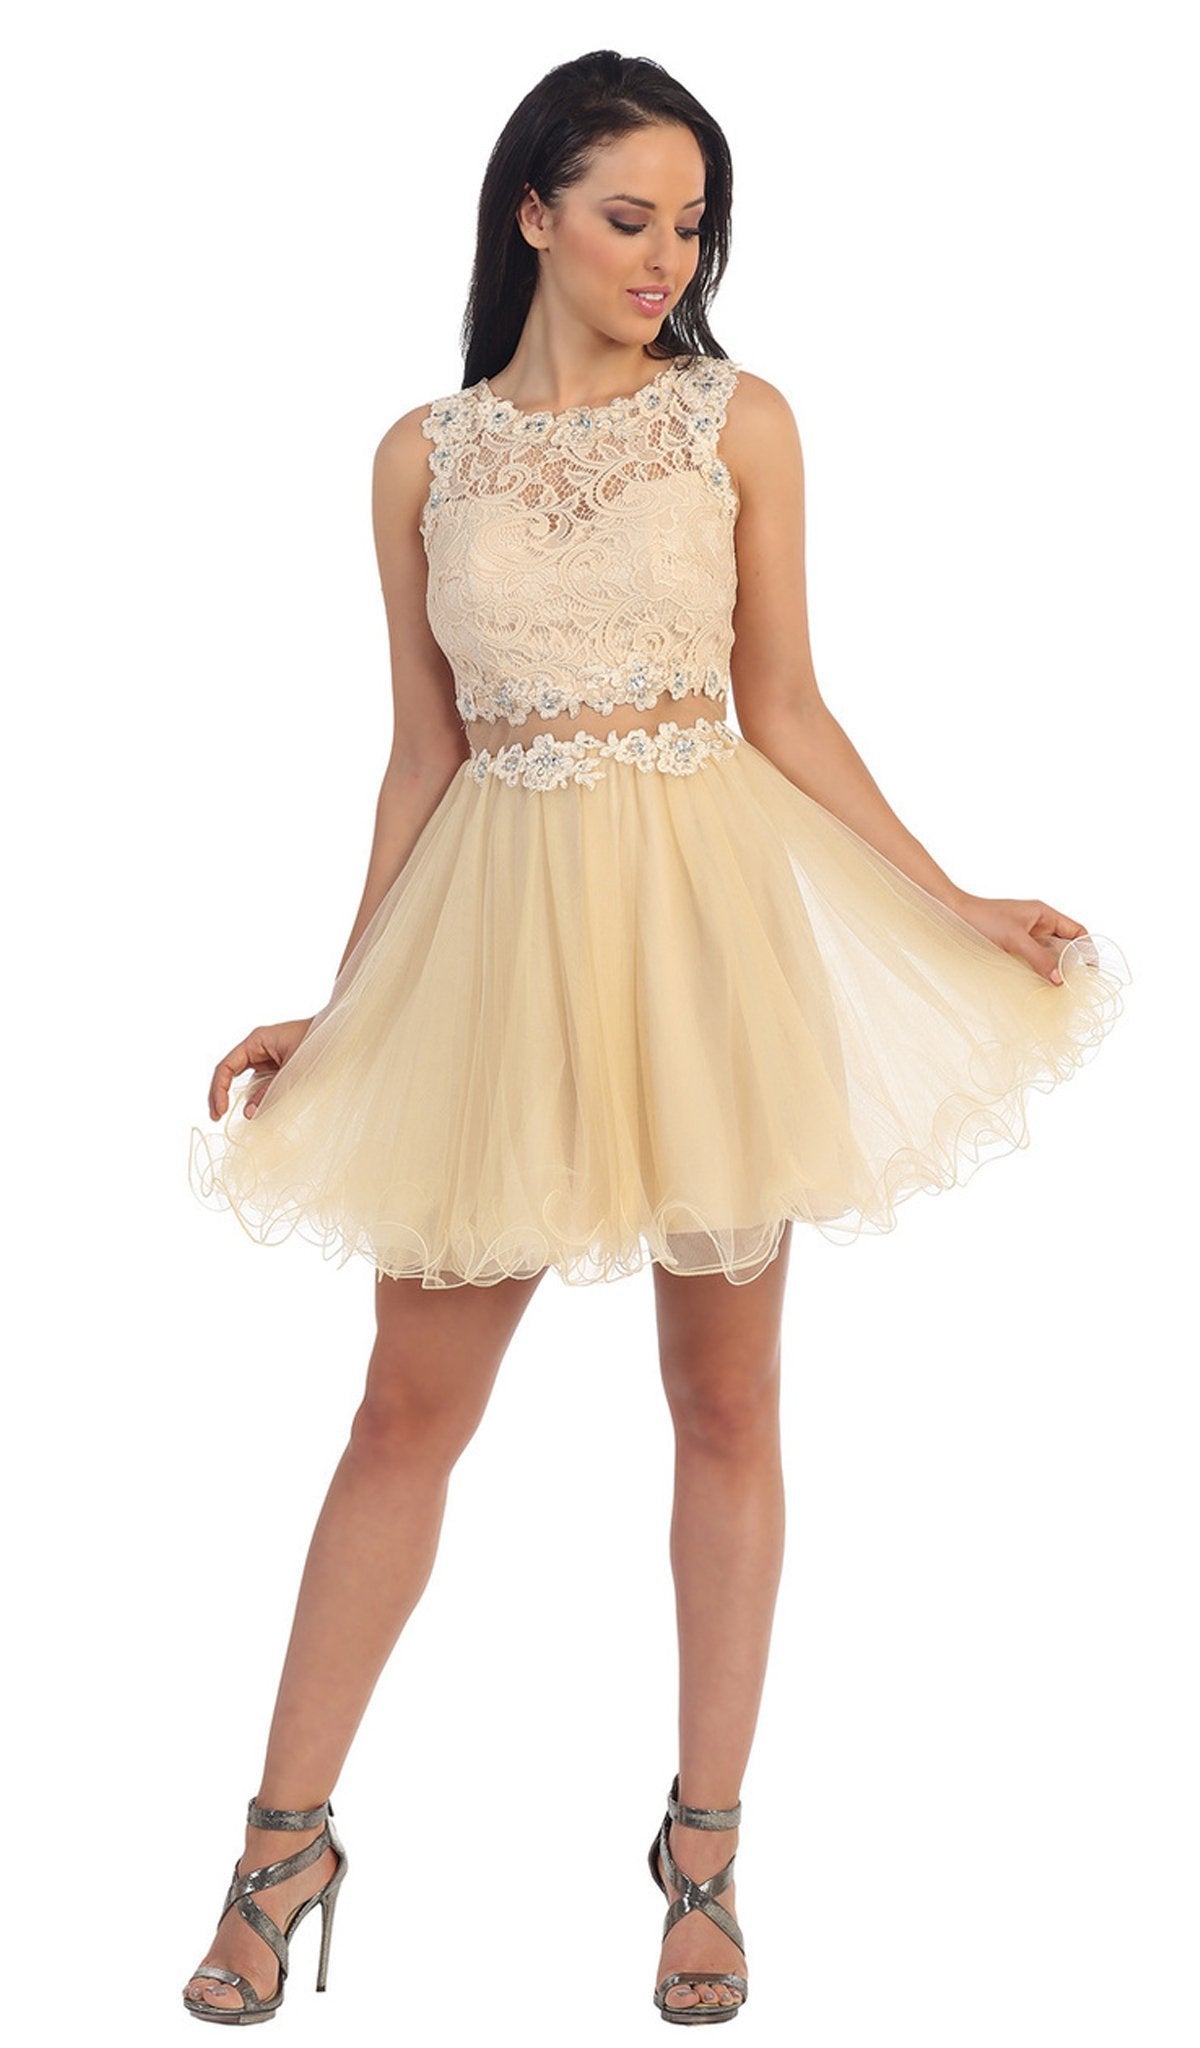 Dancing Queen - 9080 Bejeweled Lace Illusion Short Prom Dress Prom Dresses XS / Nude